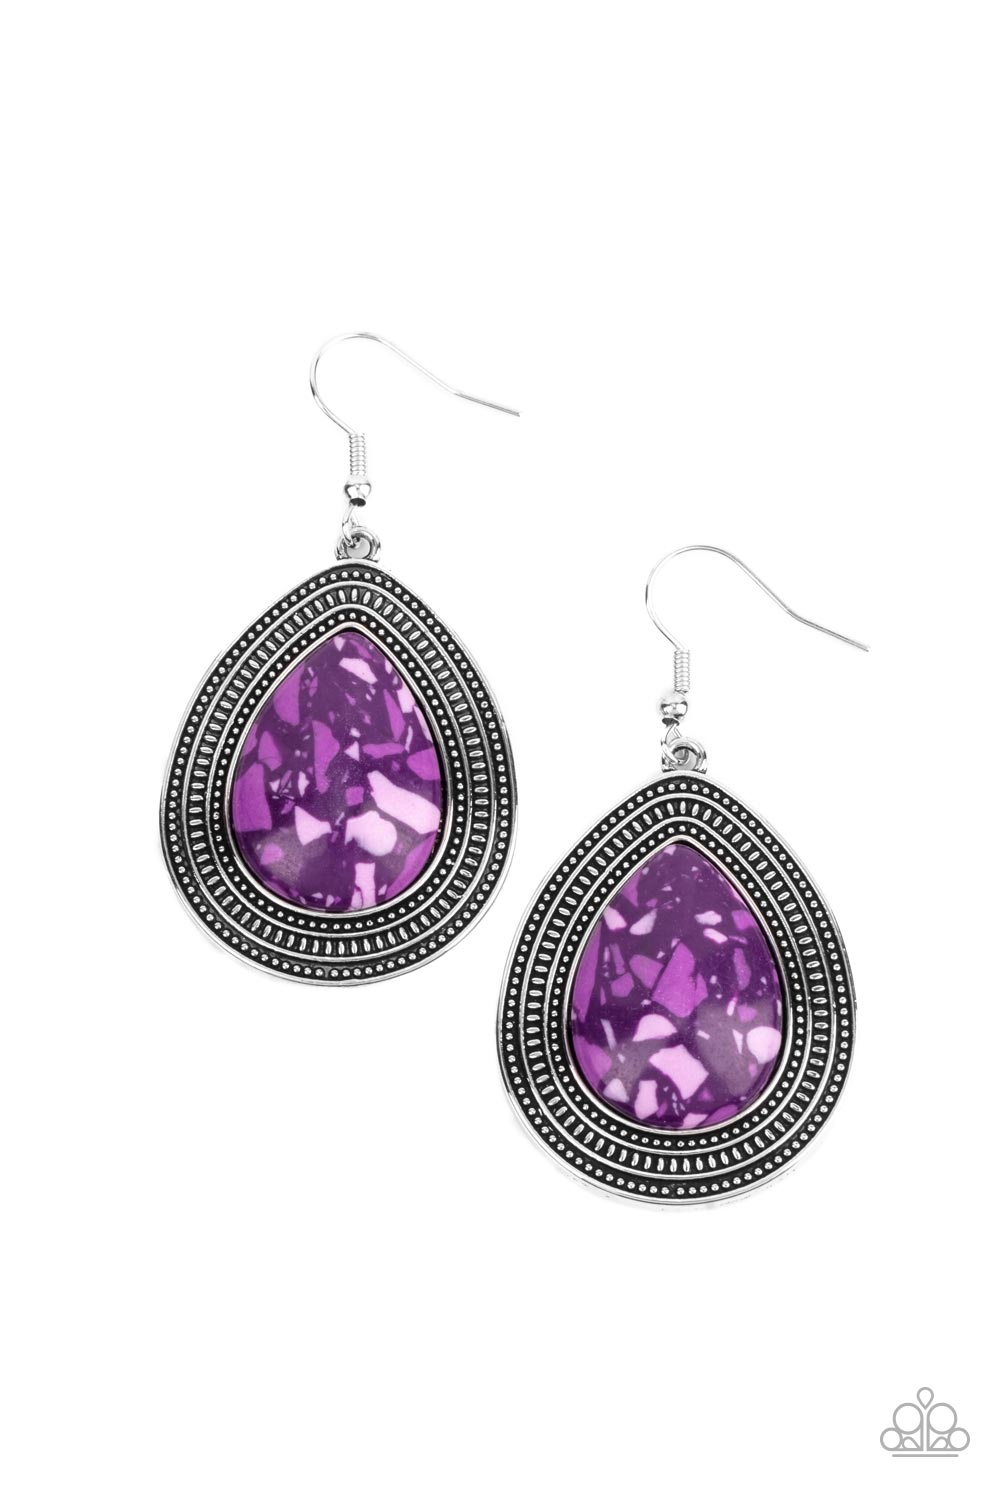 Terrazzo Tundra Purple Earring - Paparazzi Accessories  Featuring a colorful terrazzo pattern, a purple teardrop stone is pressed into the center of a silver frame studded and embossed in borders of tribal inspired textures. Earring attaches to a standard fishhook fitting.  Sold as one pair of earrings.